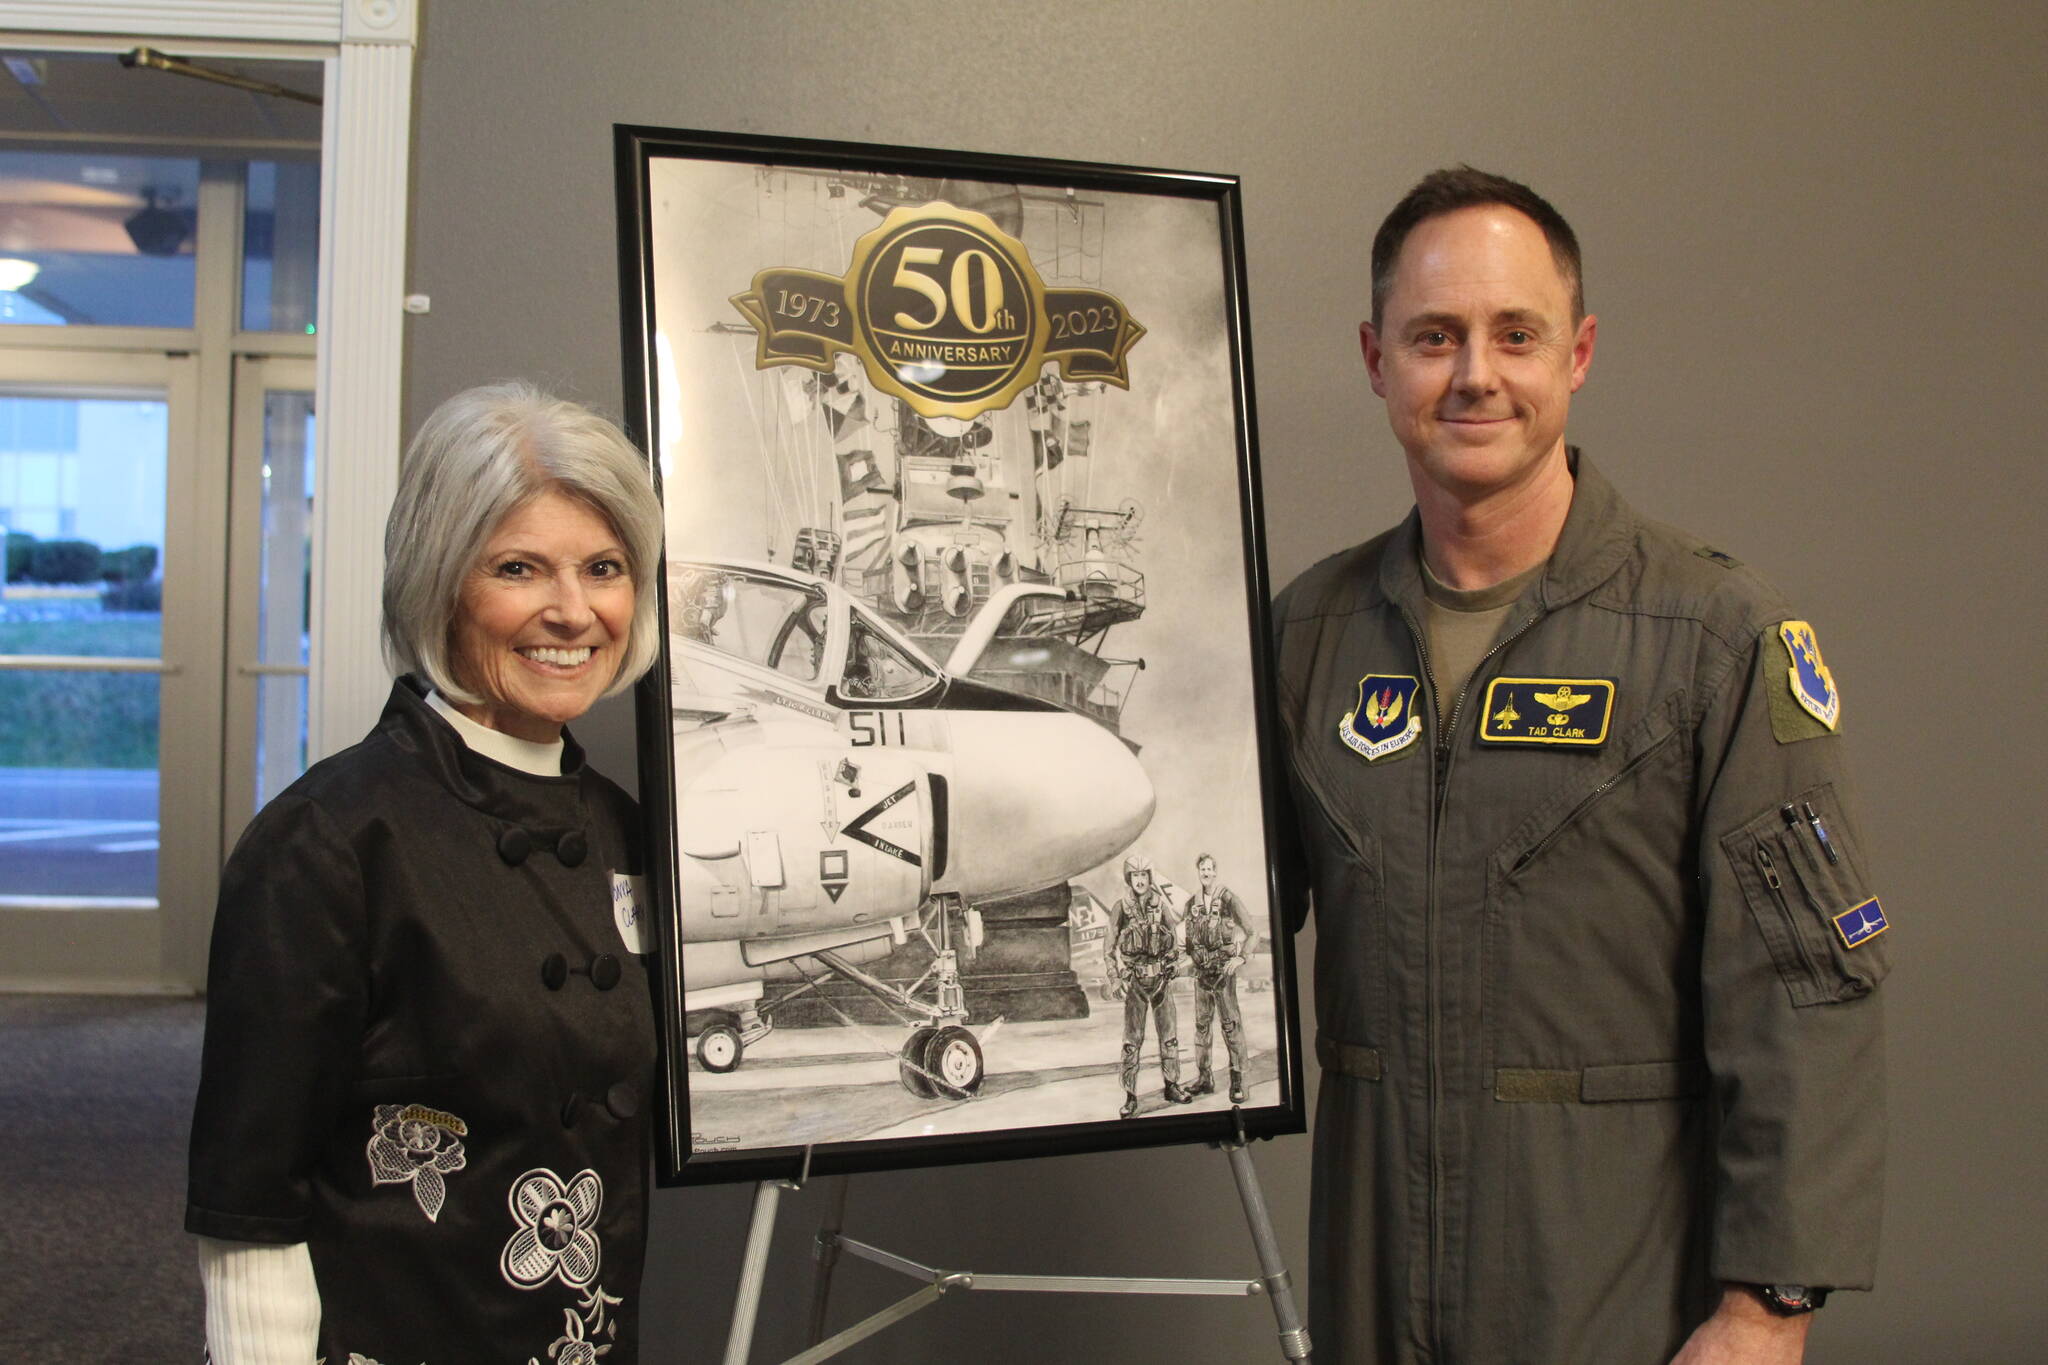 Photo by Karina Andrew/Whidbey News-Times
Tonya Clark and her son, Brigadier General Tad Clark, receive a painting of their husband and father, bombardier Robert Clark, with his pilot, Michael McCormick, who were shot down over North Vietnam in 1973.